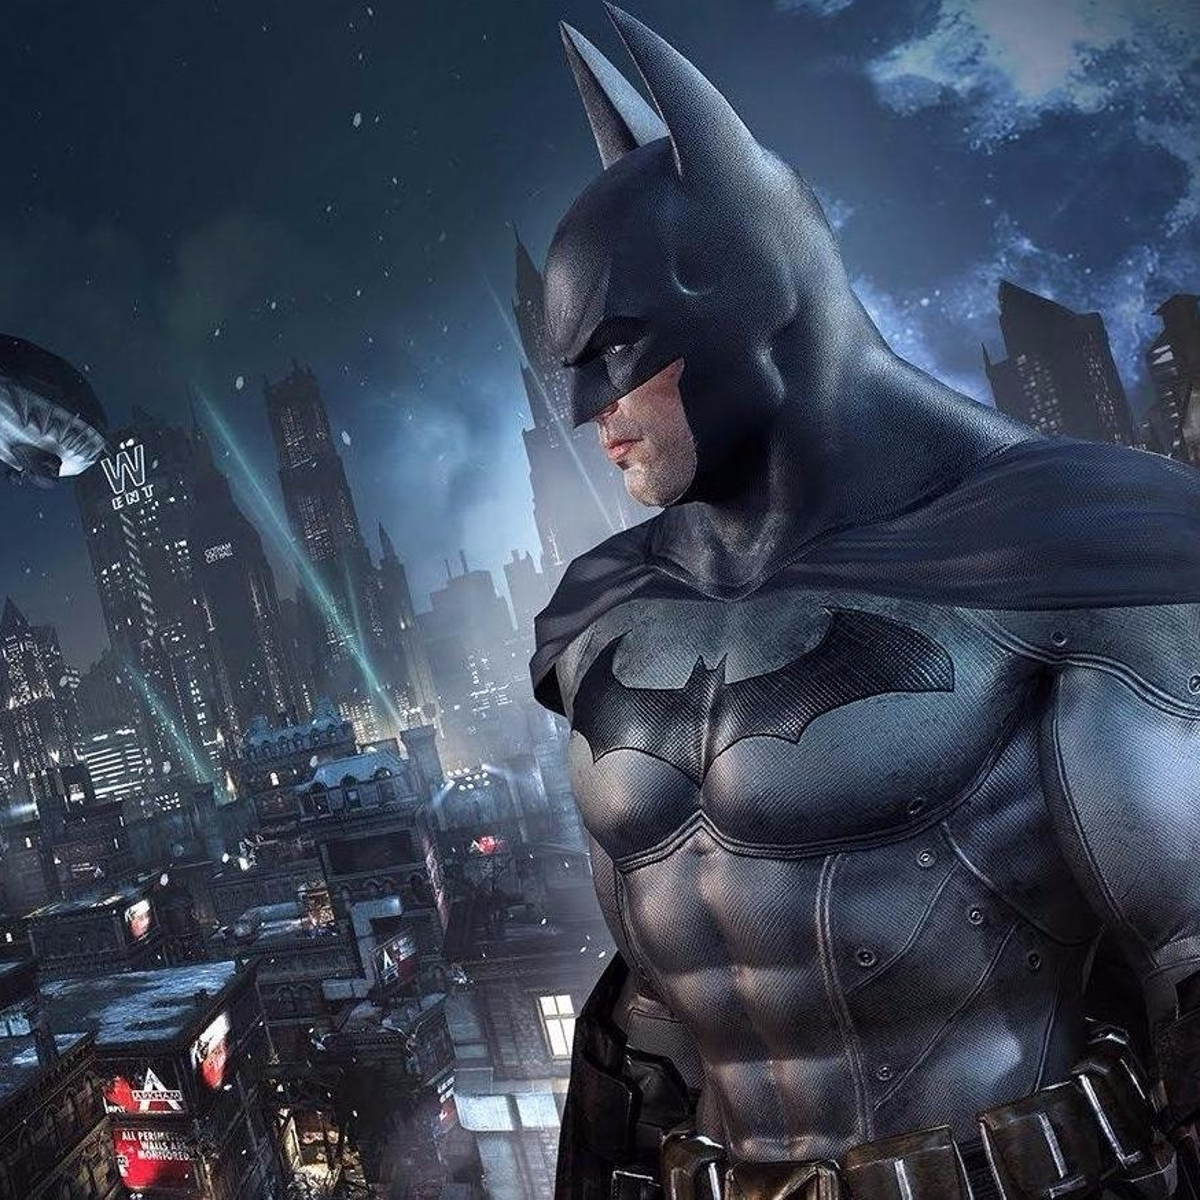 Batman: Return to Arkham has stealth PS4 Pro support 